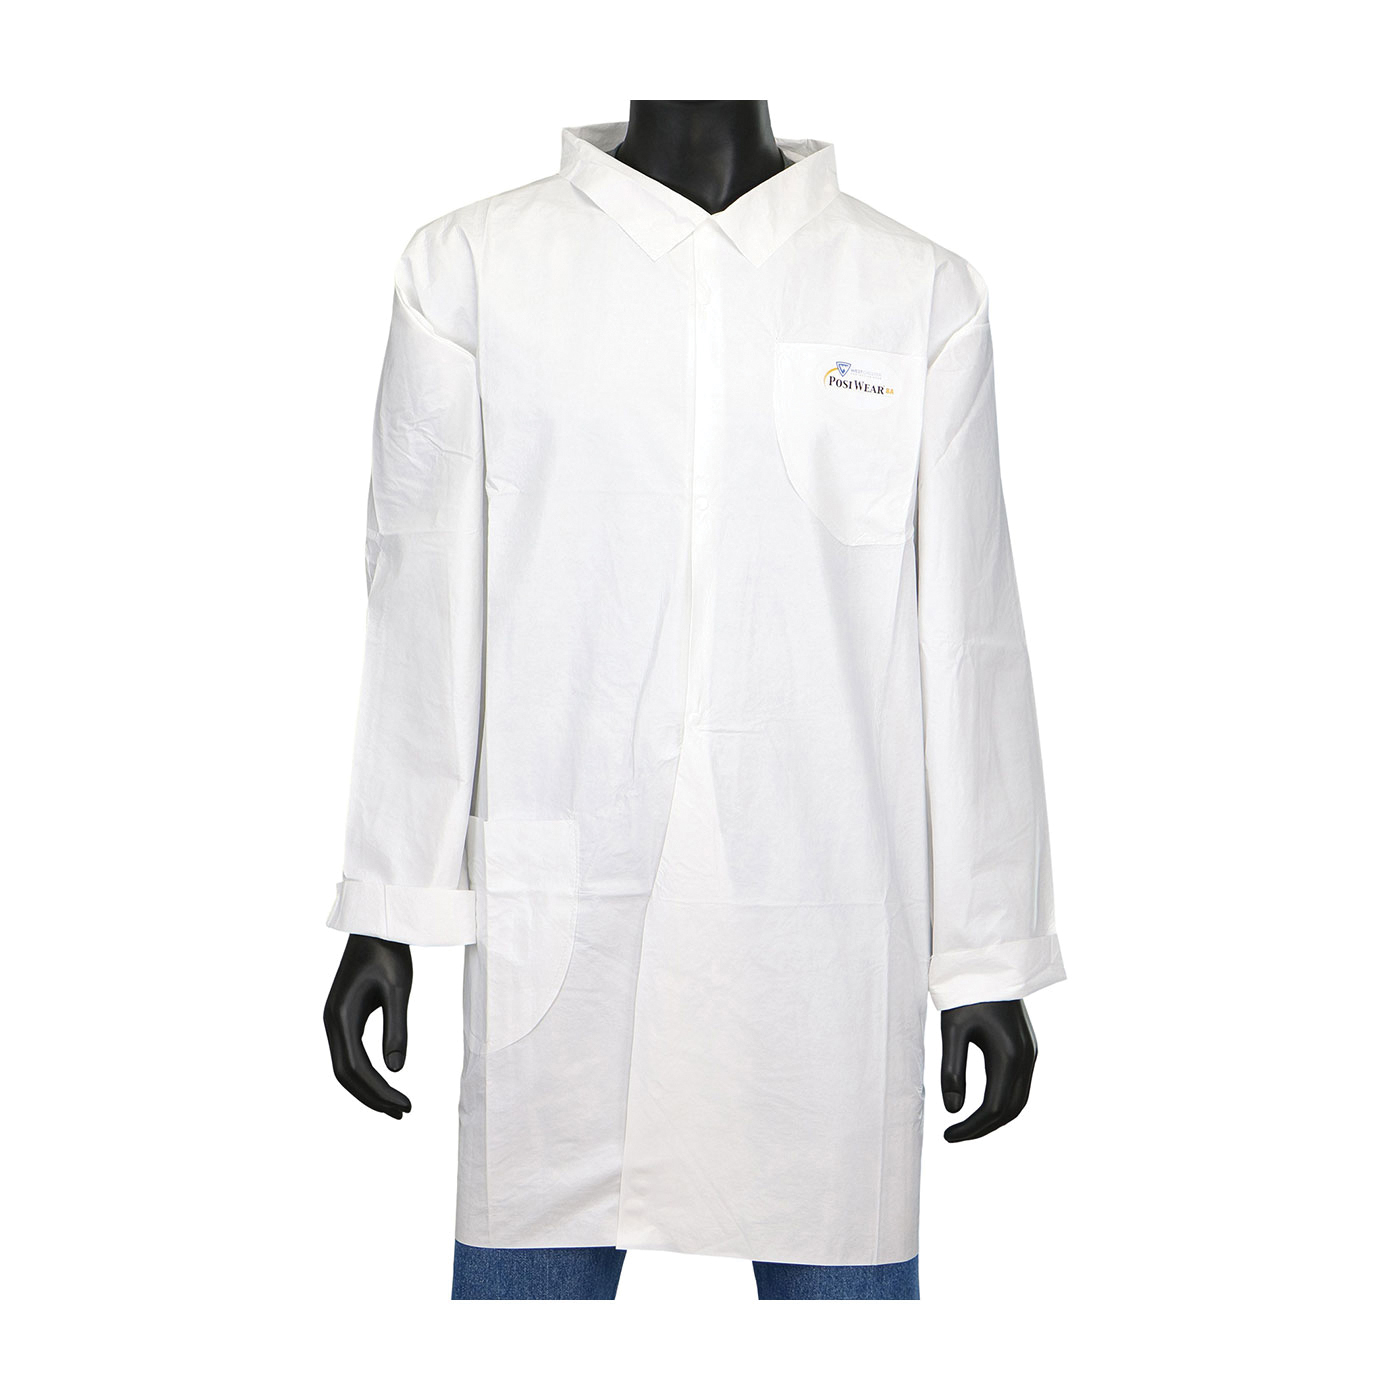 PIP® 3620/3XL 3620 BA Lab Coat, 3XL, White, Polypropylene/Polyethylene, 39 in L, Front Snap Closure, 2 Pockets, ANSI Specified, ASTM 1670, NFPA 99